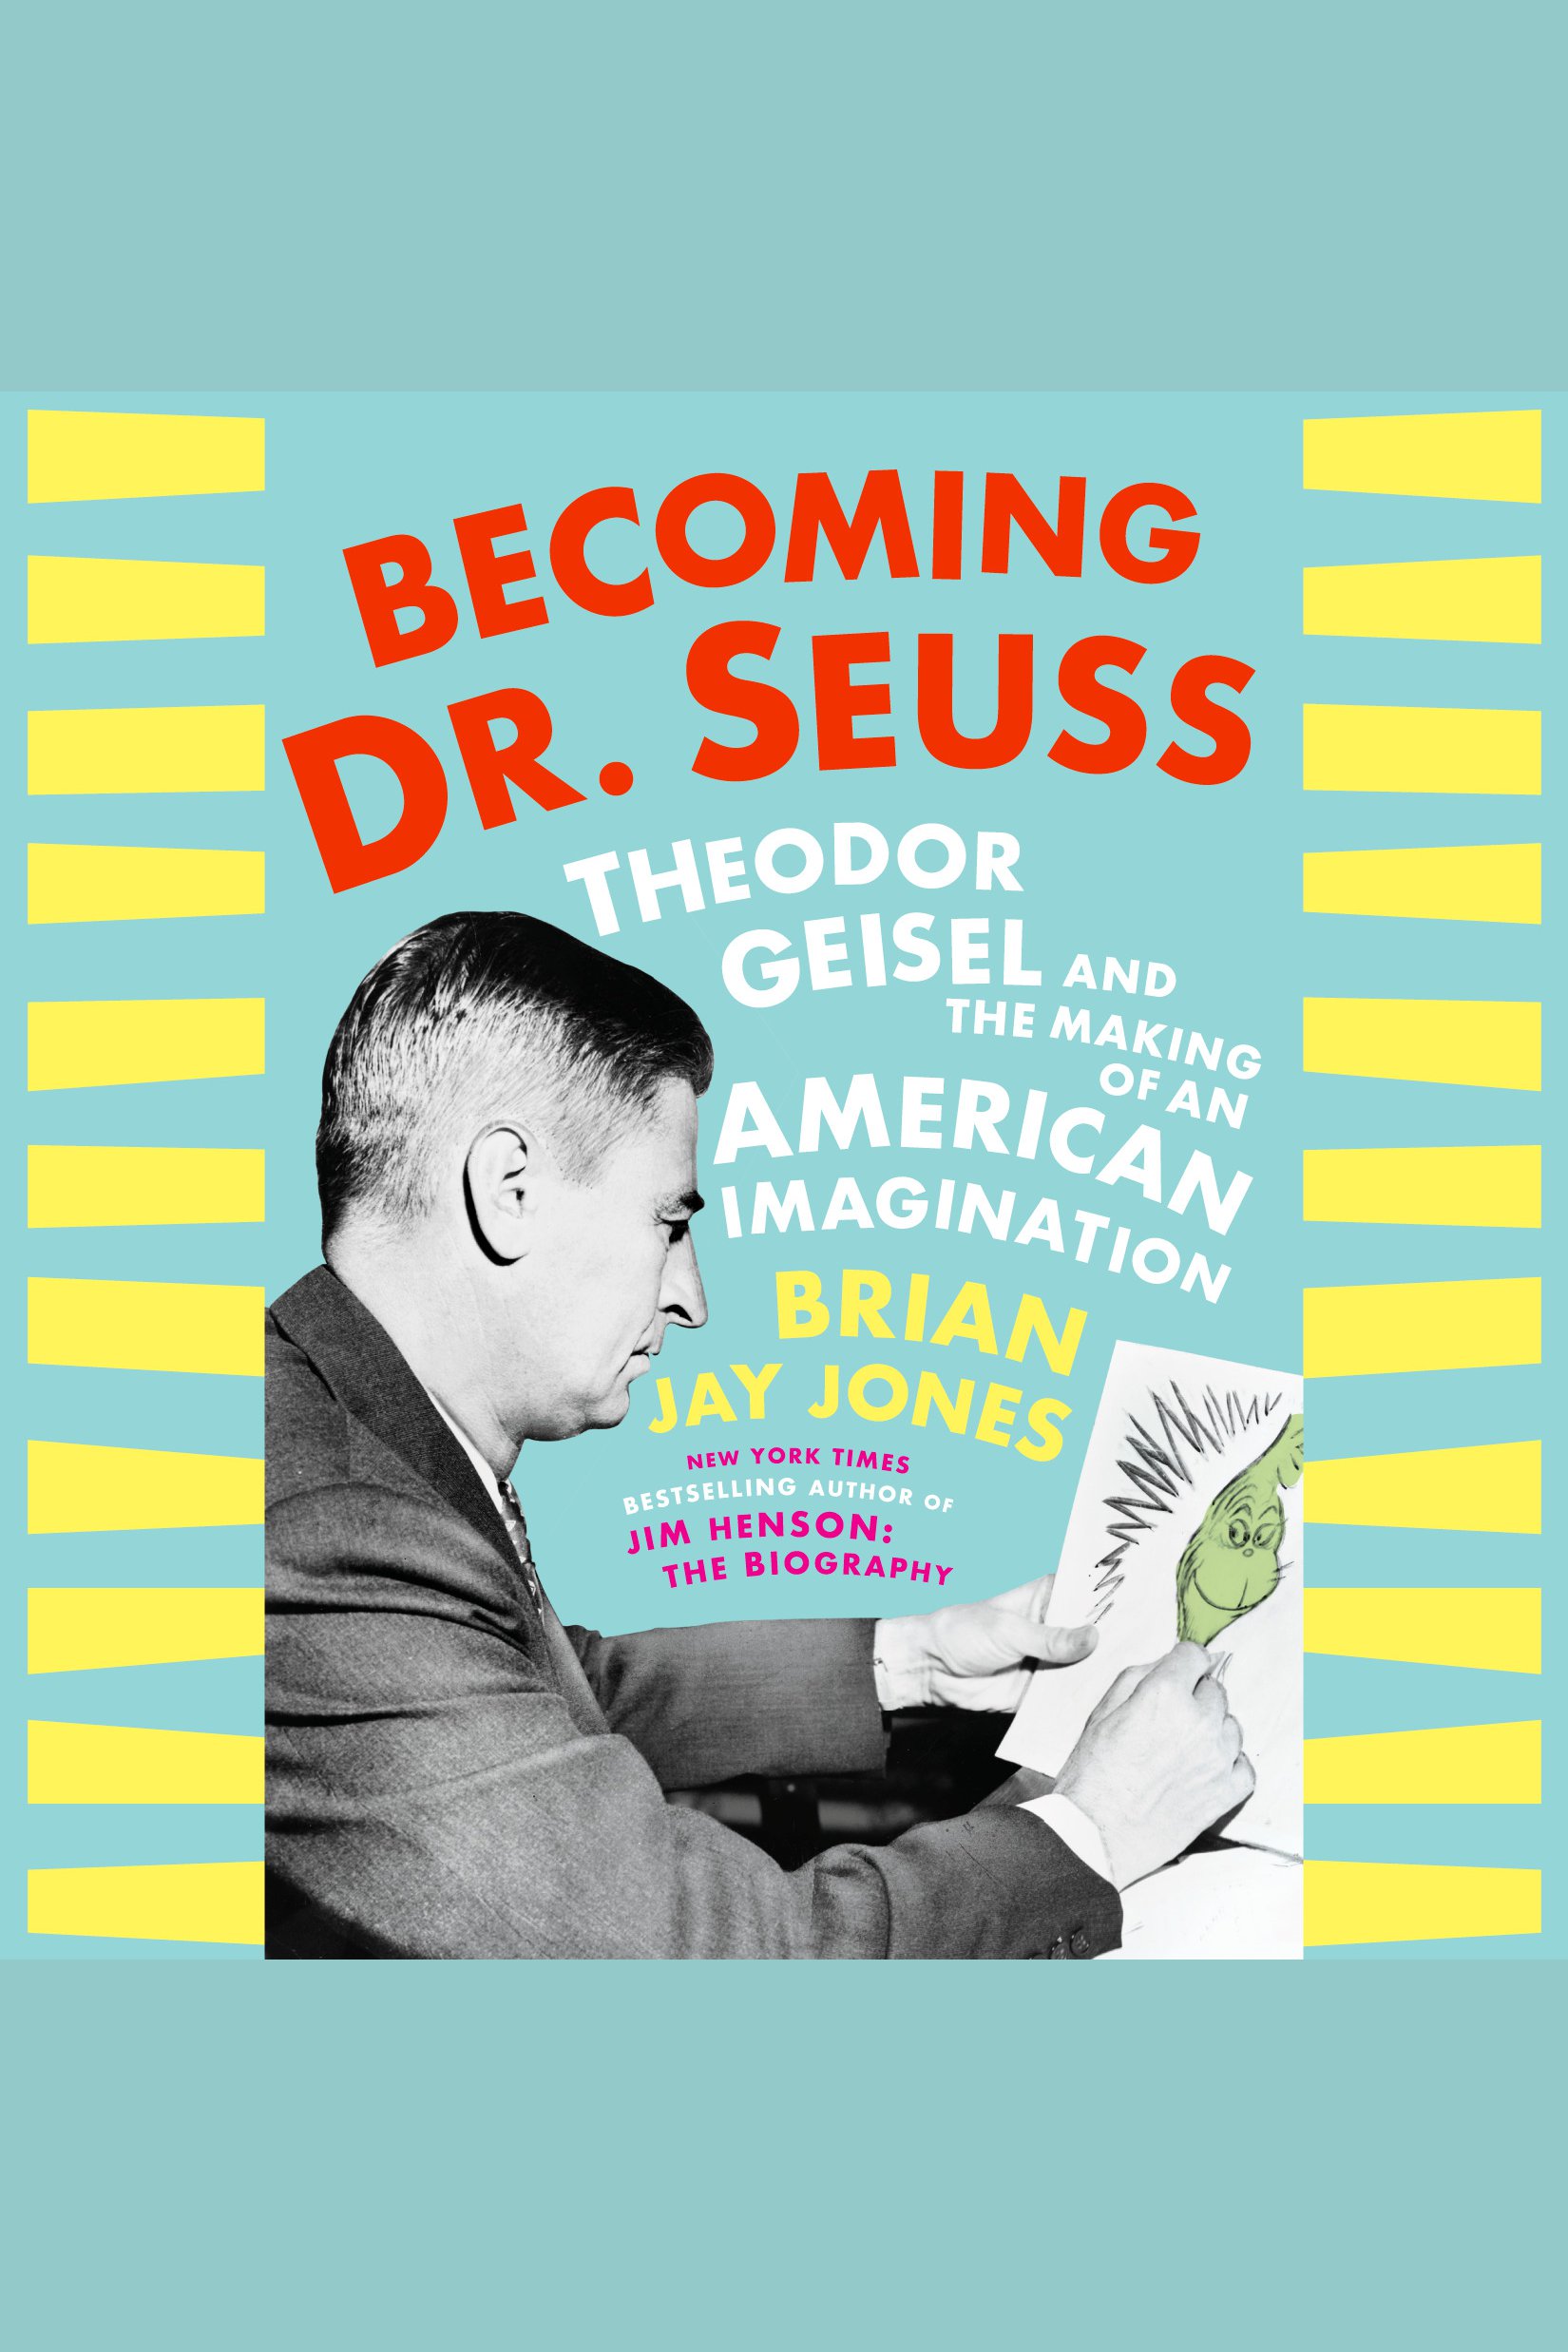 Image de couverture de Becoming Dr. Seuss [electronic resource] : Theodor Geisel and the Making of an American Imagination